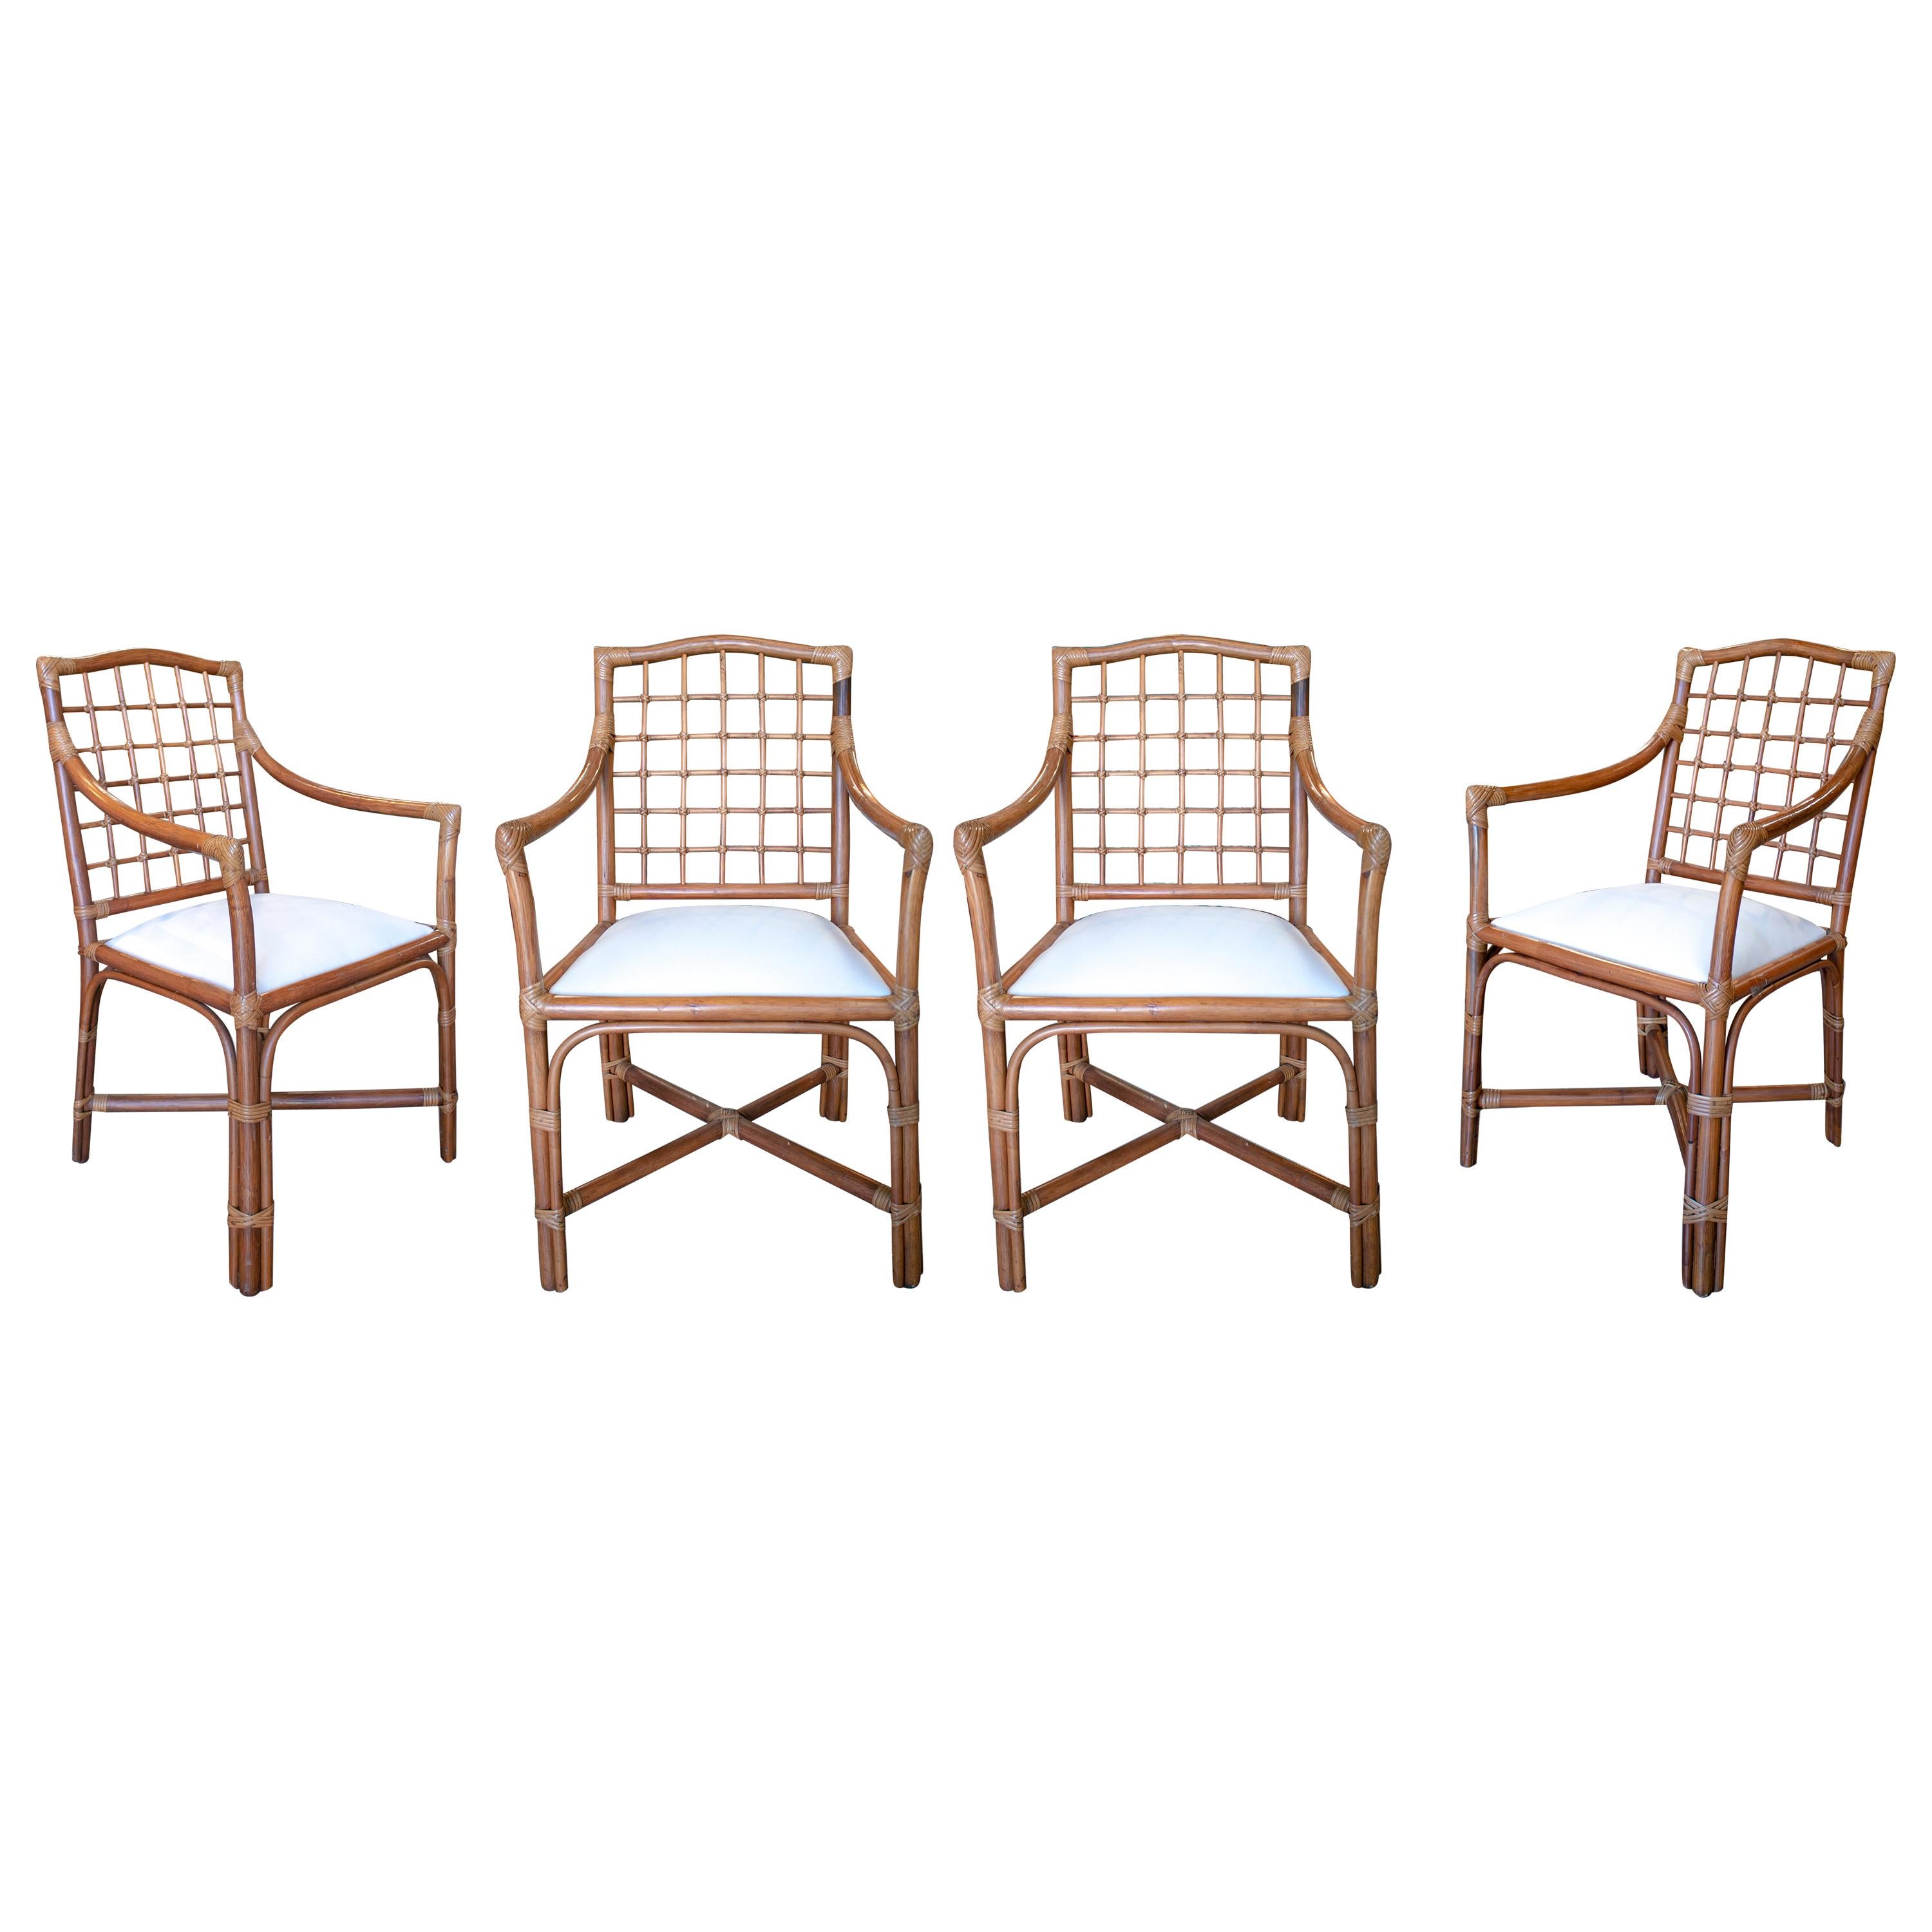 1980s Spanish Set of Four Bamboo Chairs with White Upholstered Seat Cushions